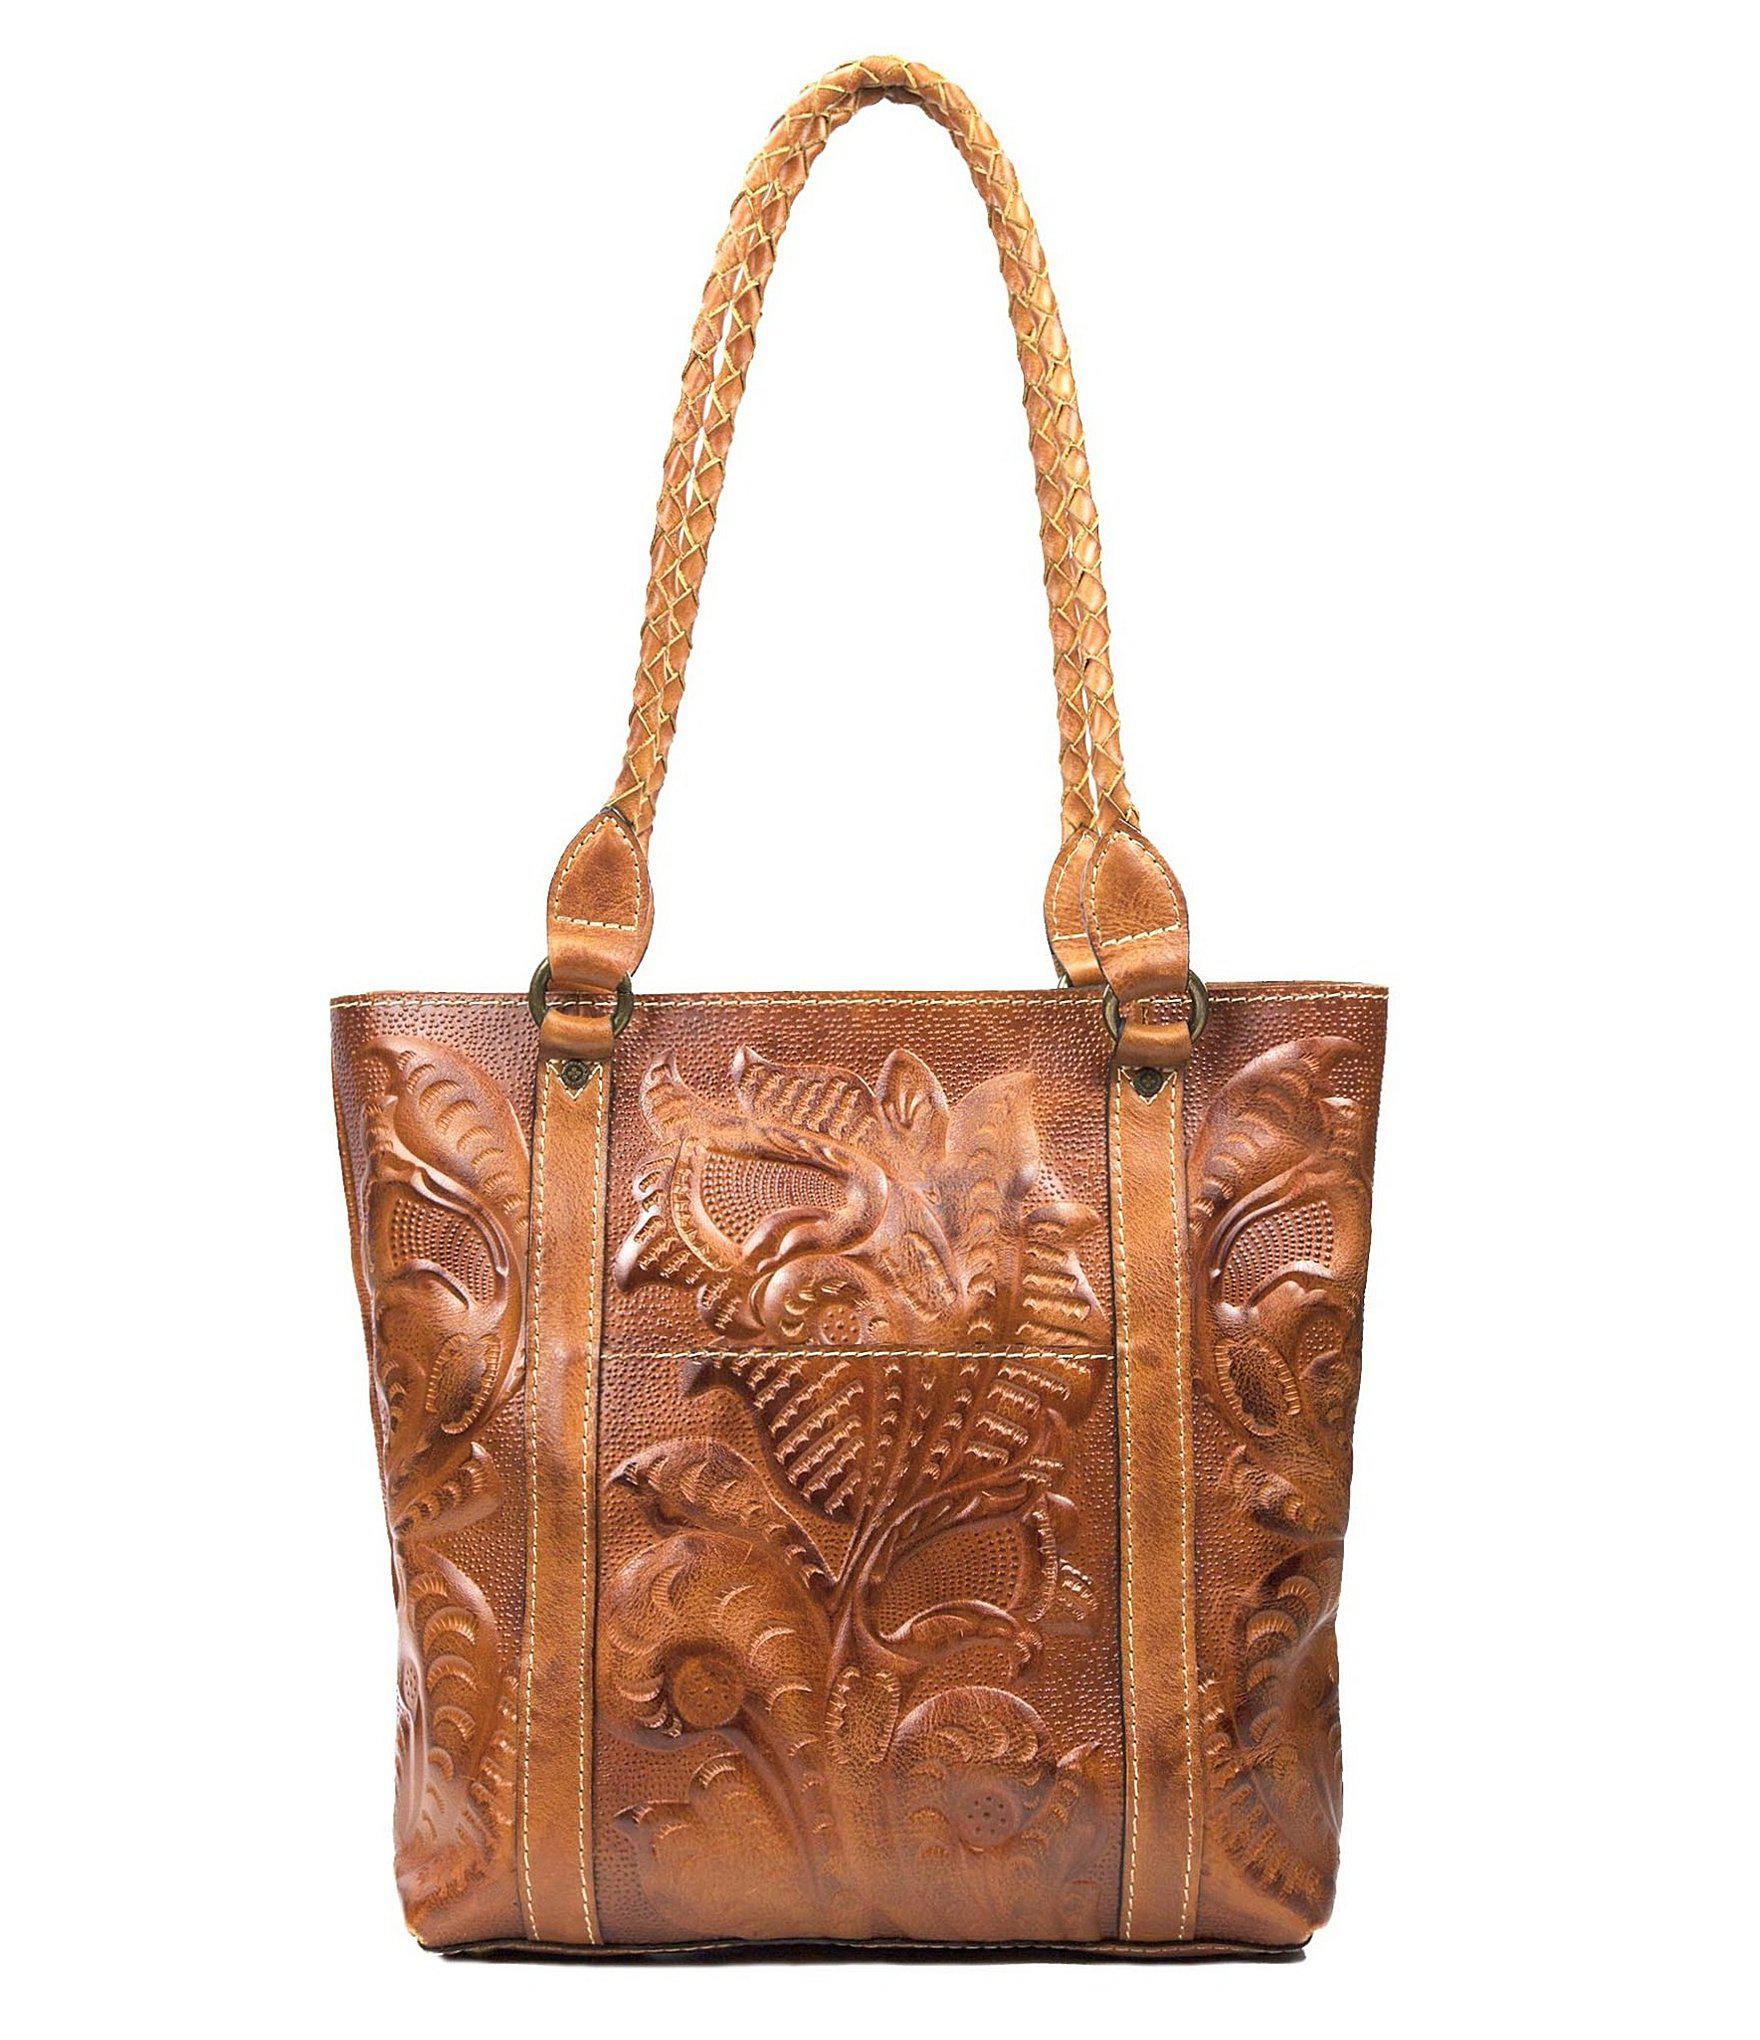 Patricia Nash Leather Burnished Tooled Collection Rena Tasseled Tote in